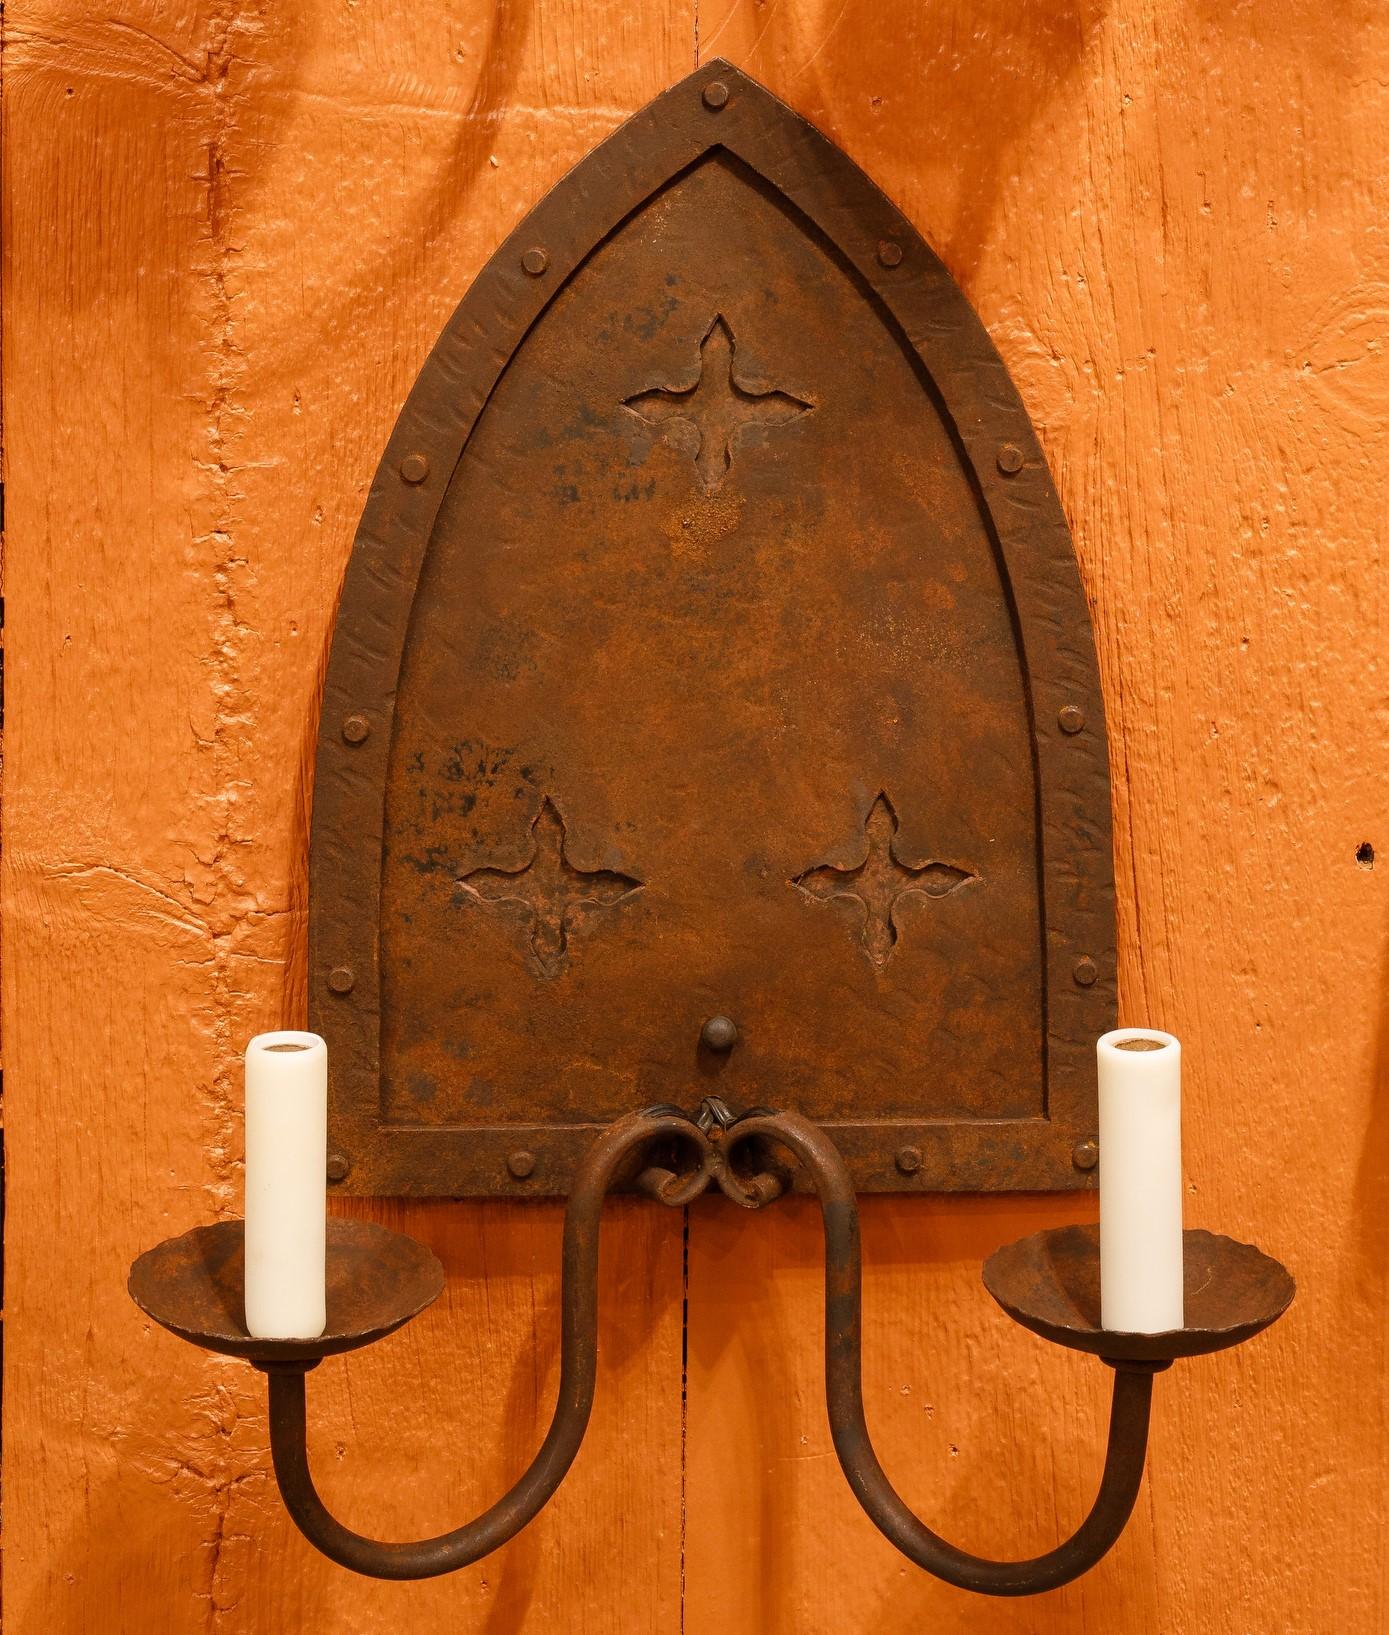 This hand-made pair of sconces has a simple and classic Gothic style.  The tall sconces have two arms that are situated so that they do not protrude too far from wall.  The hand-finished iron has a warm brown finish.  The finish could be adjusted to